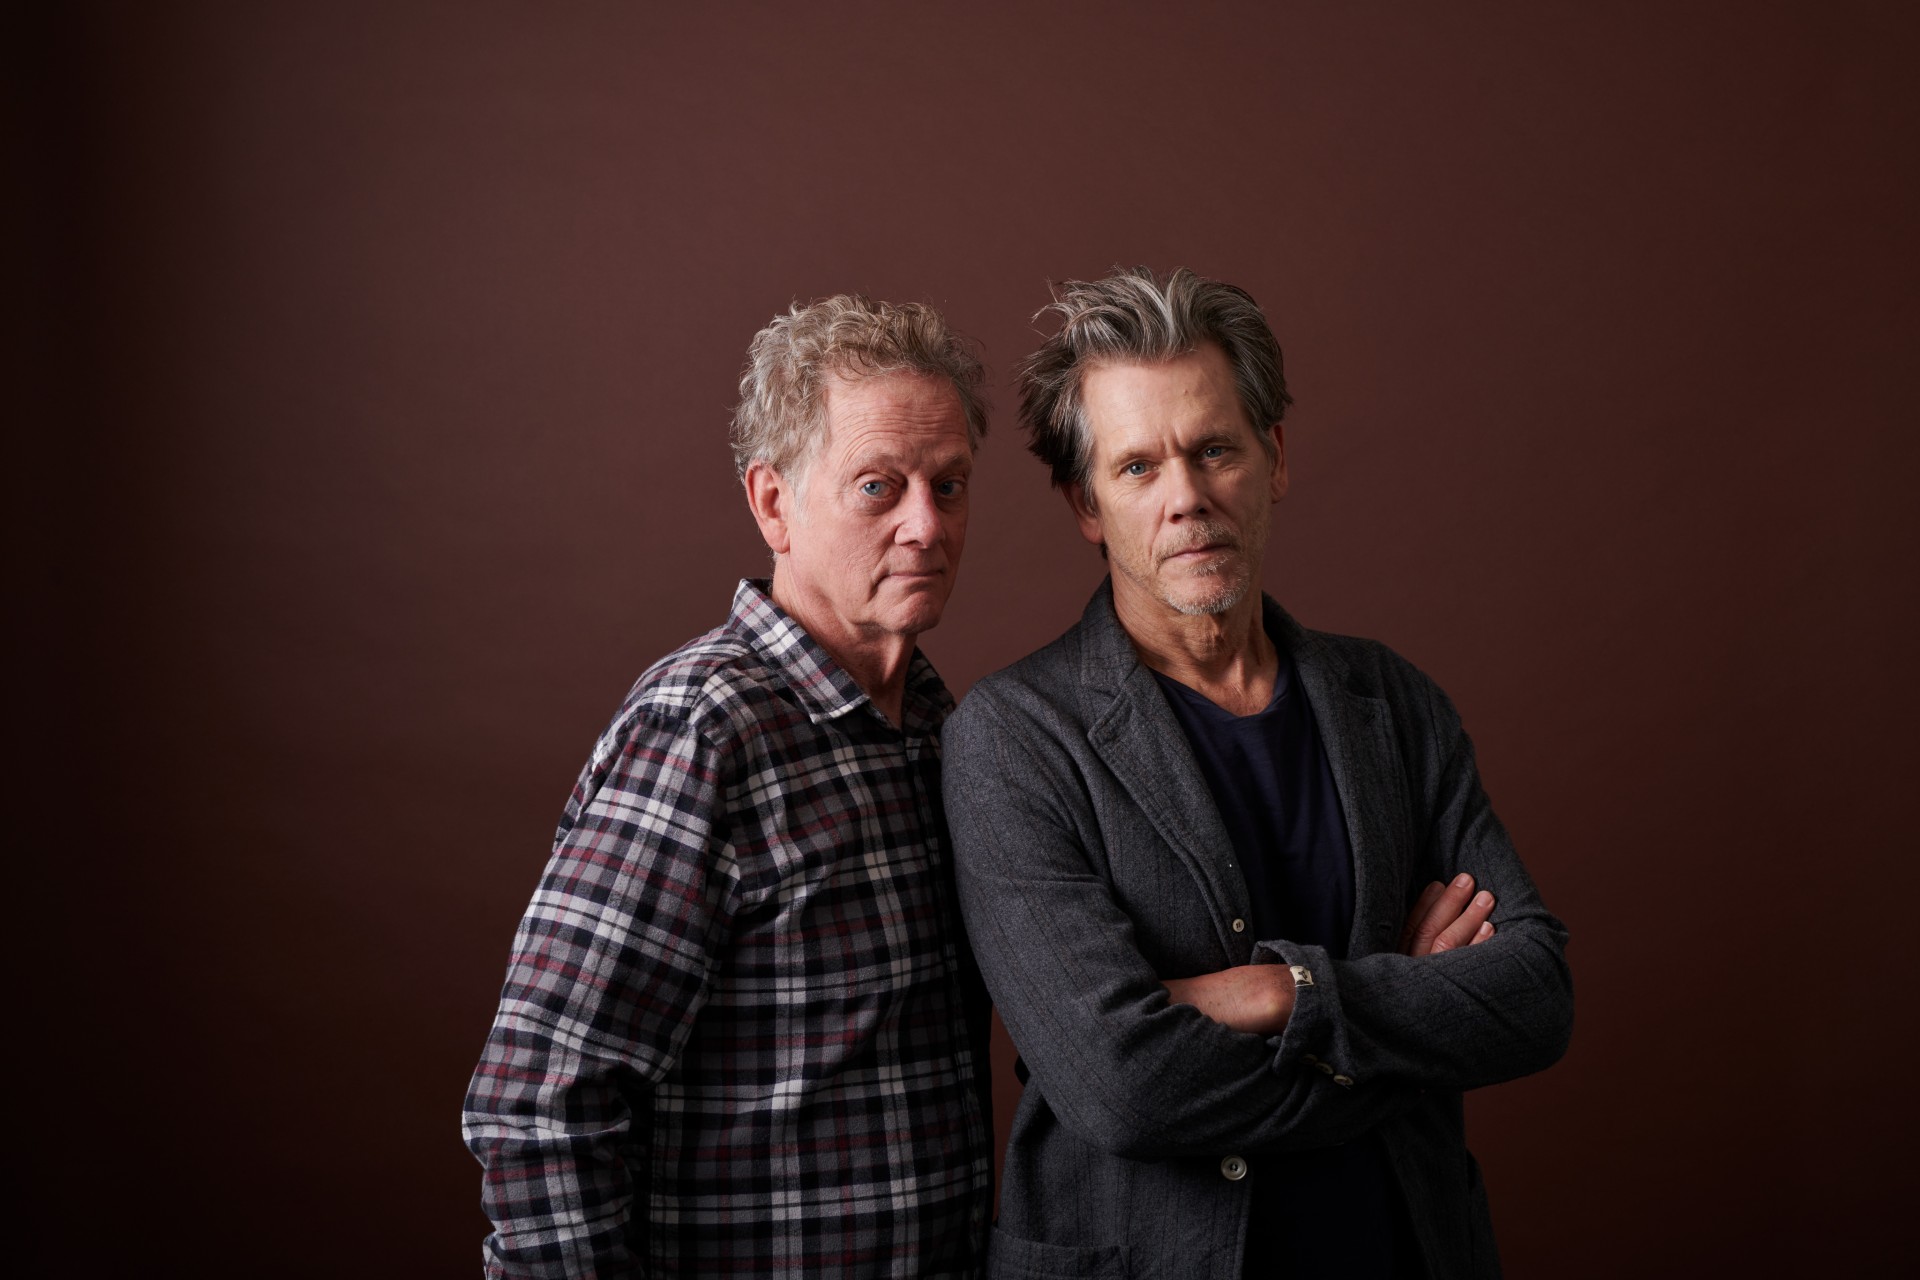 The Bacon Brothers, photo by Jacob Blinkenstaff